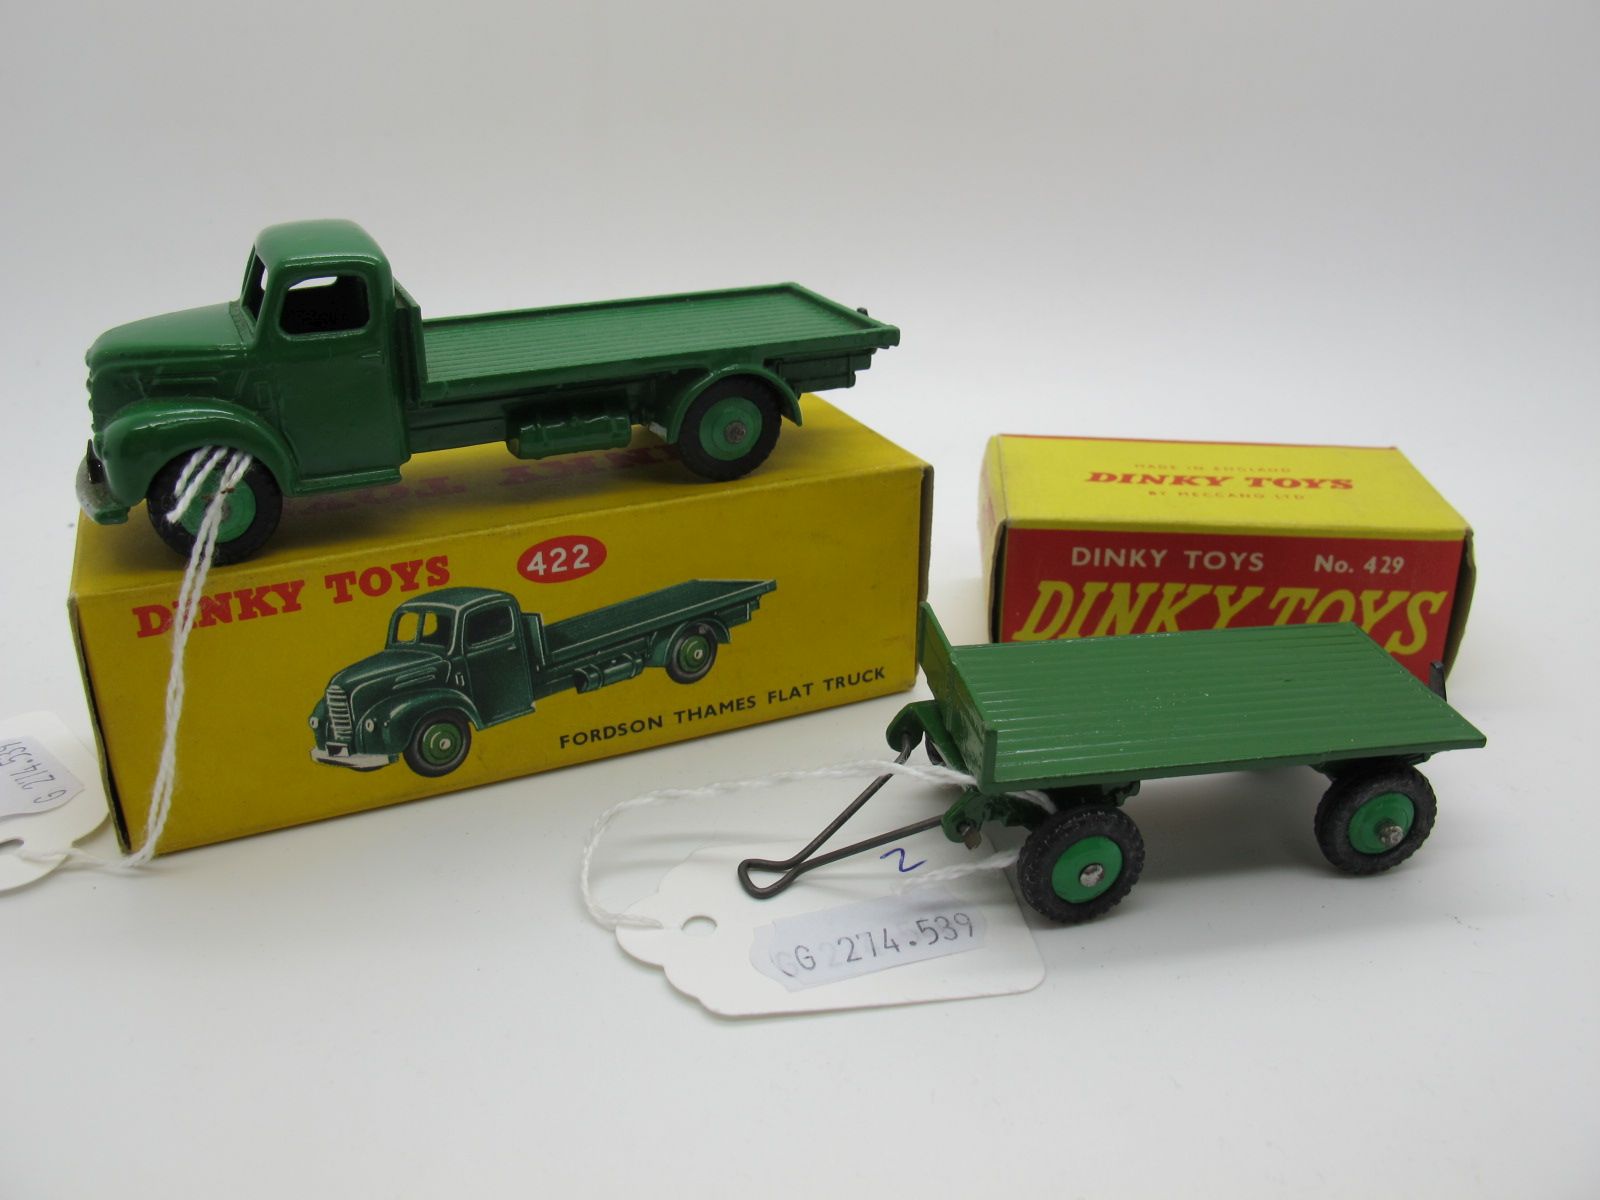 A Boxed Original Dinky #422 Fordson Thames Flat Truck, dark green body, mid green hubs, silver